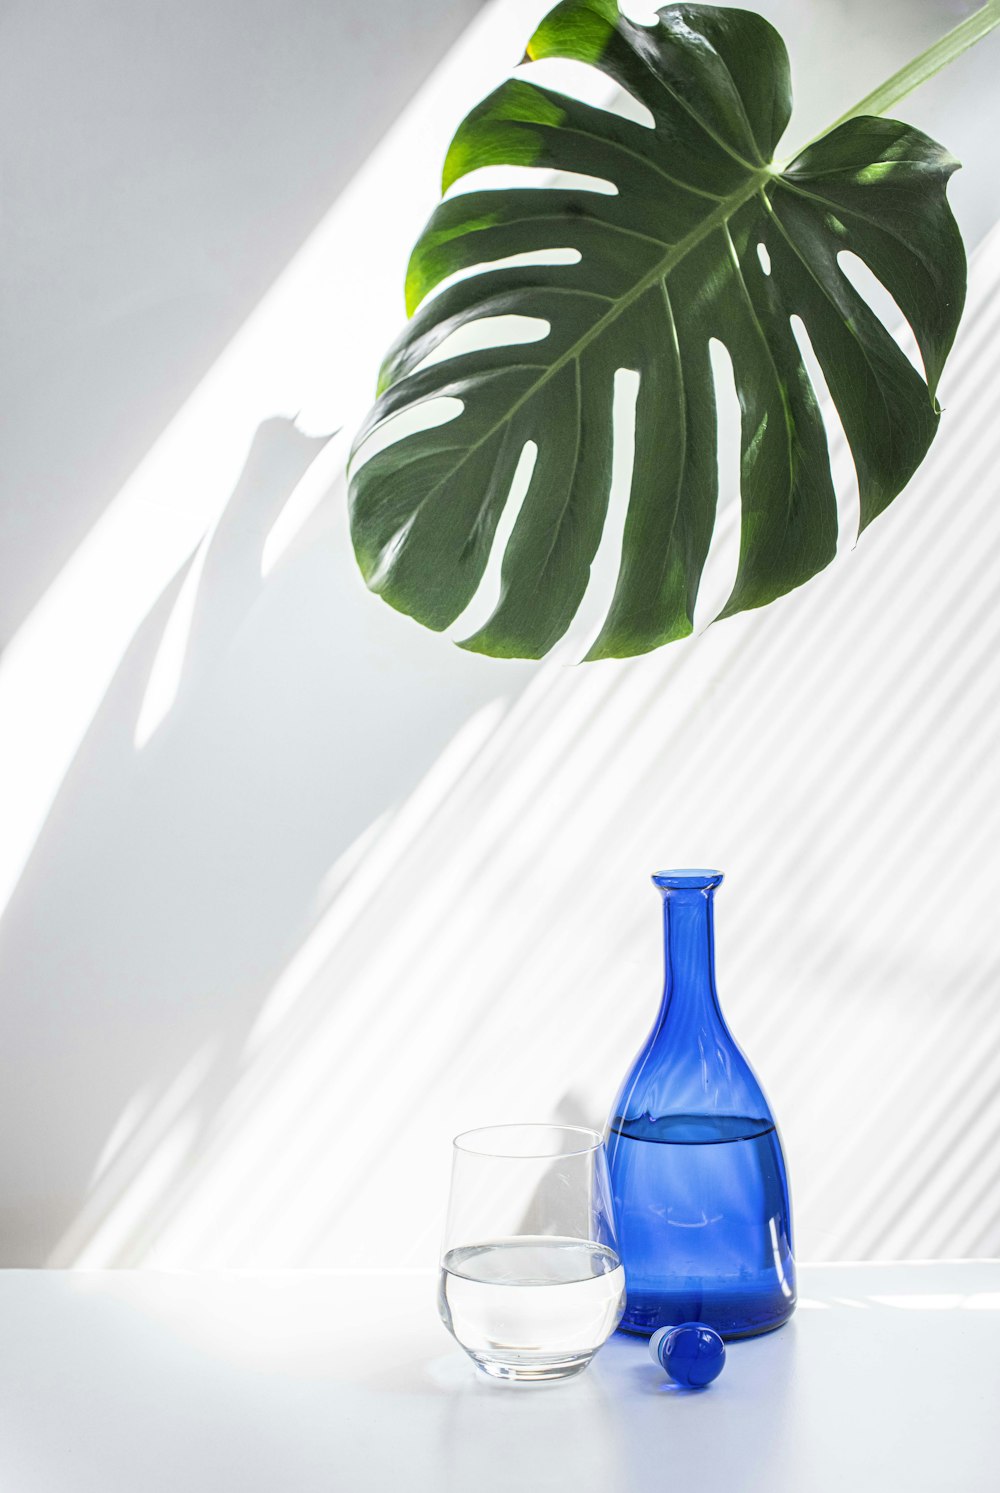 green plant in blue glass vase